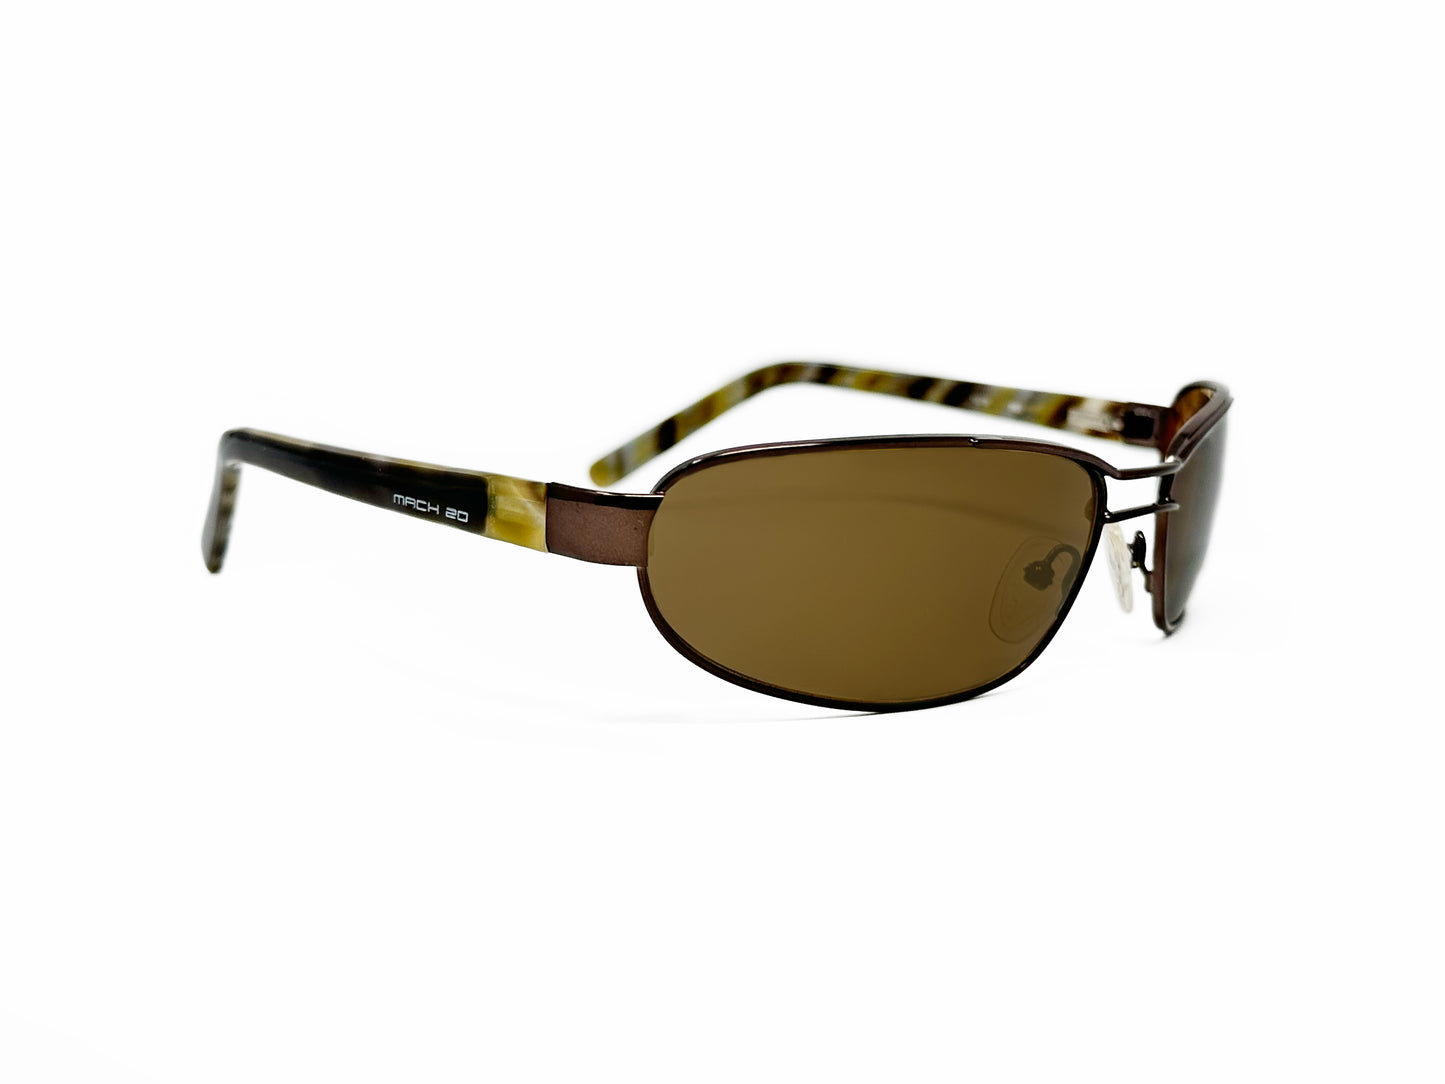 Mach 20 curved rectangular, metal sunglass. Model: 1078. Color: 263 - Bronze with green lenses. Side view.